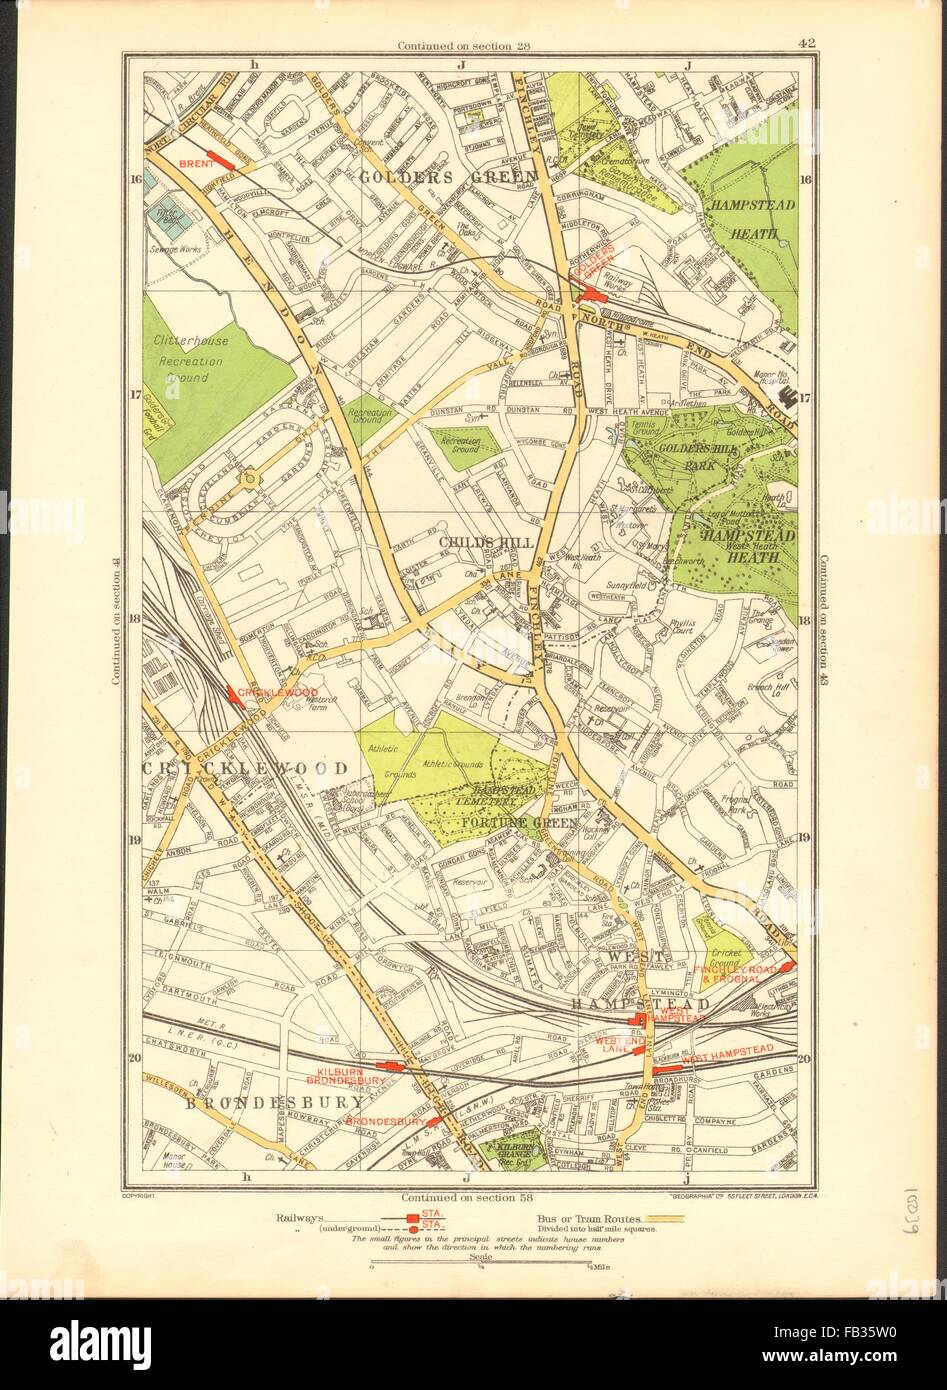 CRICKLEWOOD: Brondesbury,Fortune/Golders Green,Hampstead,Child's Hill, 1937 map Stock Photo